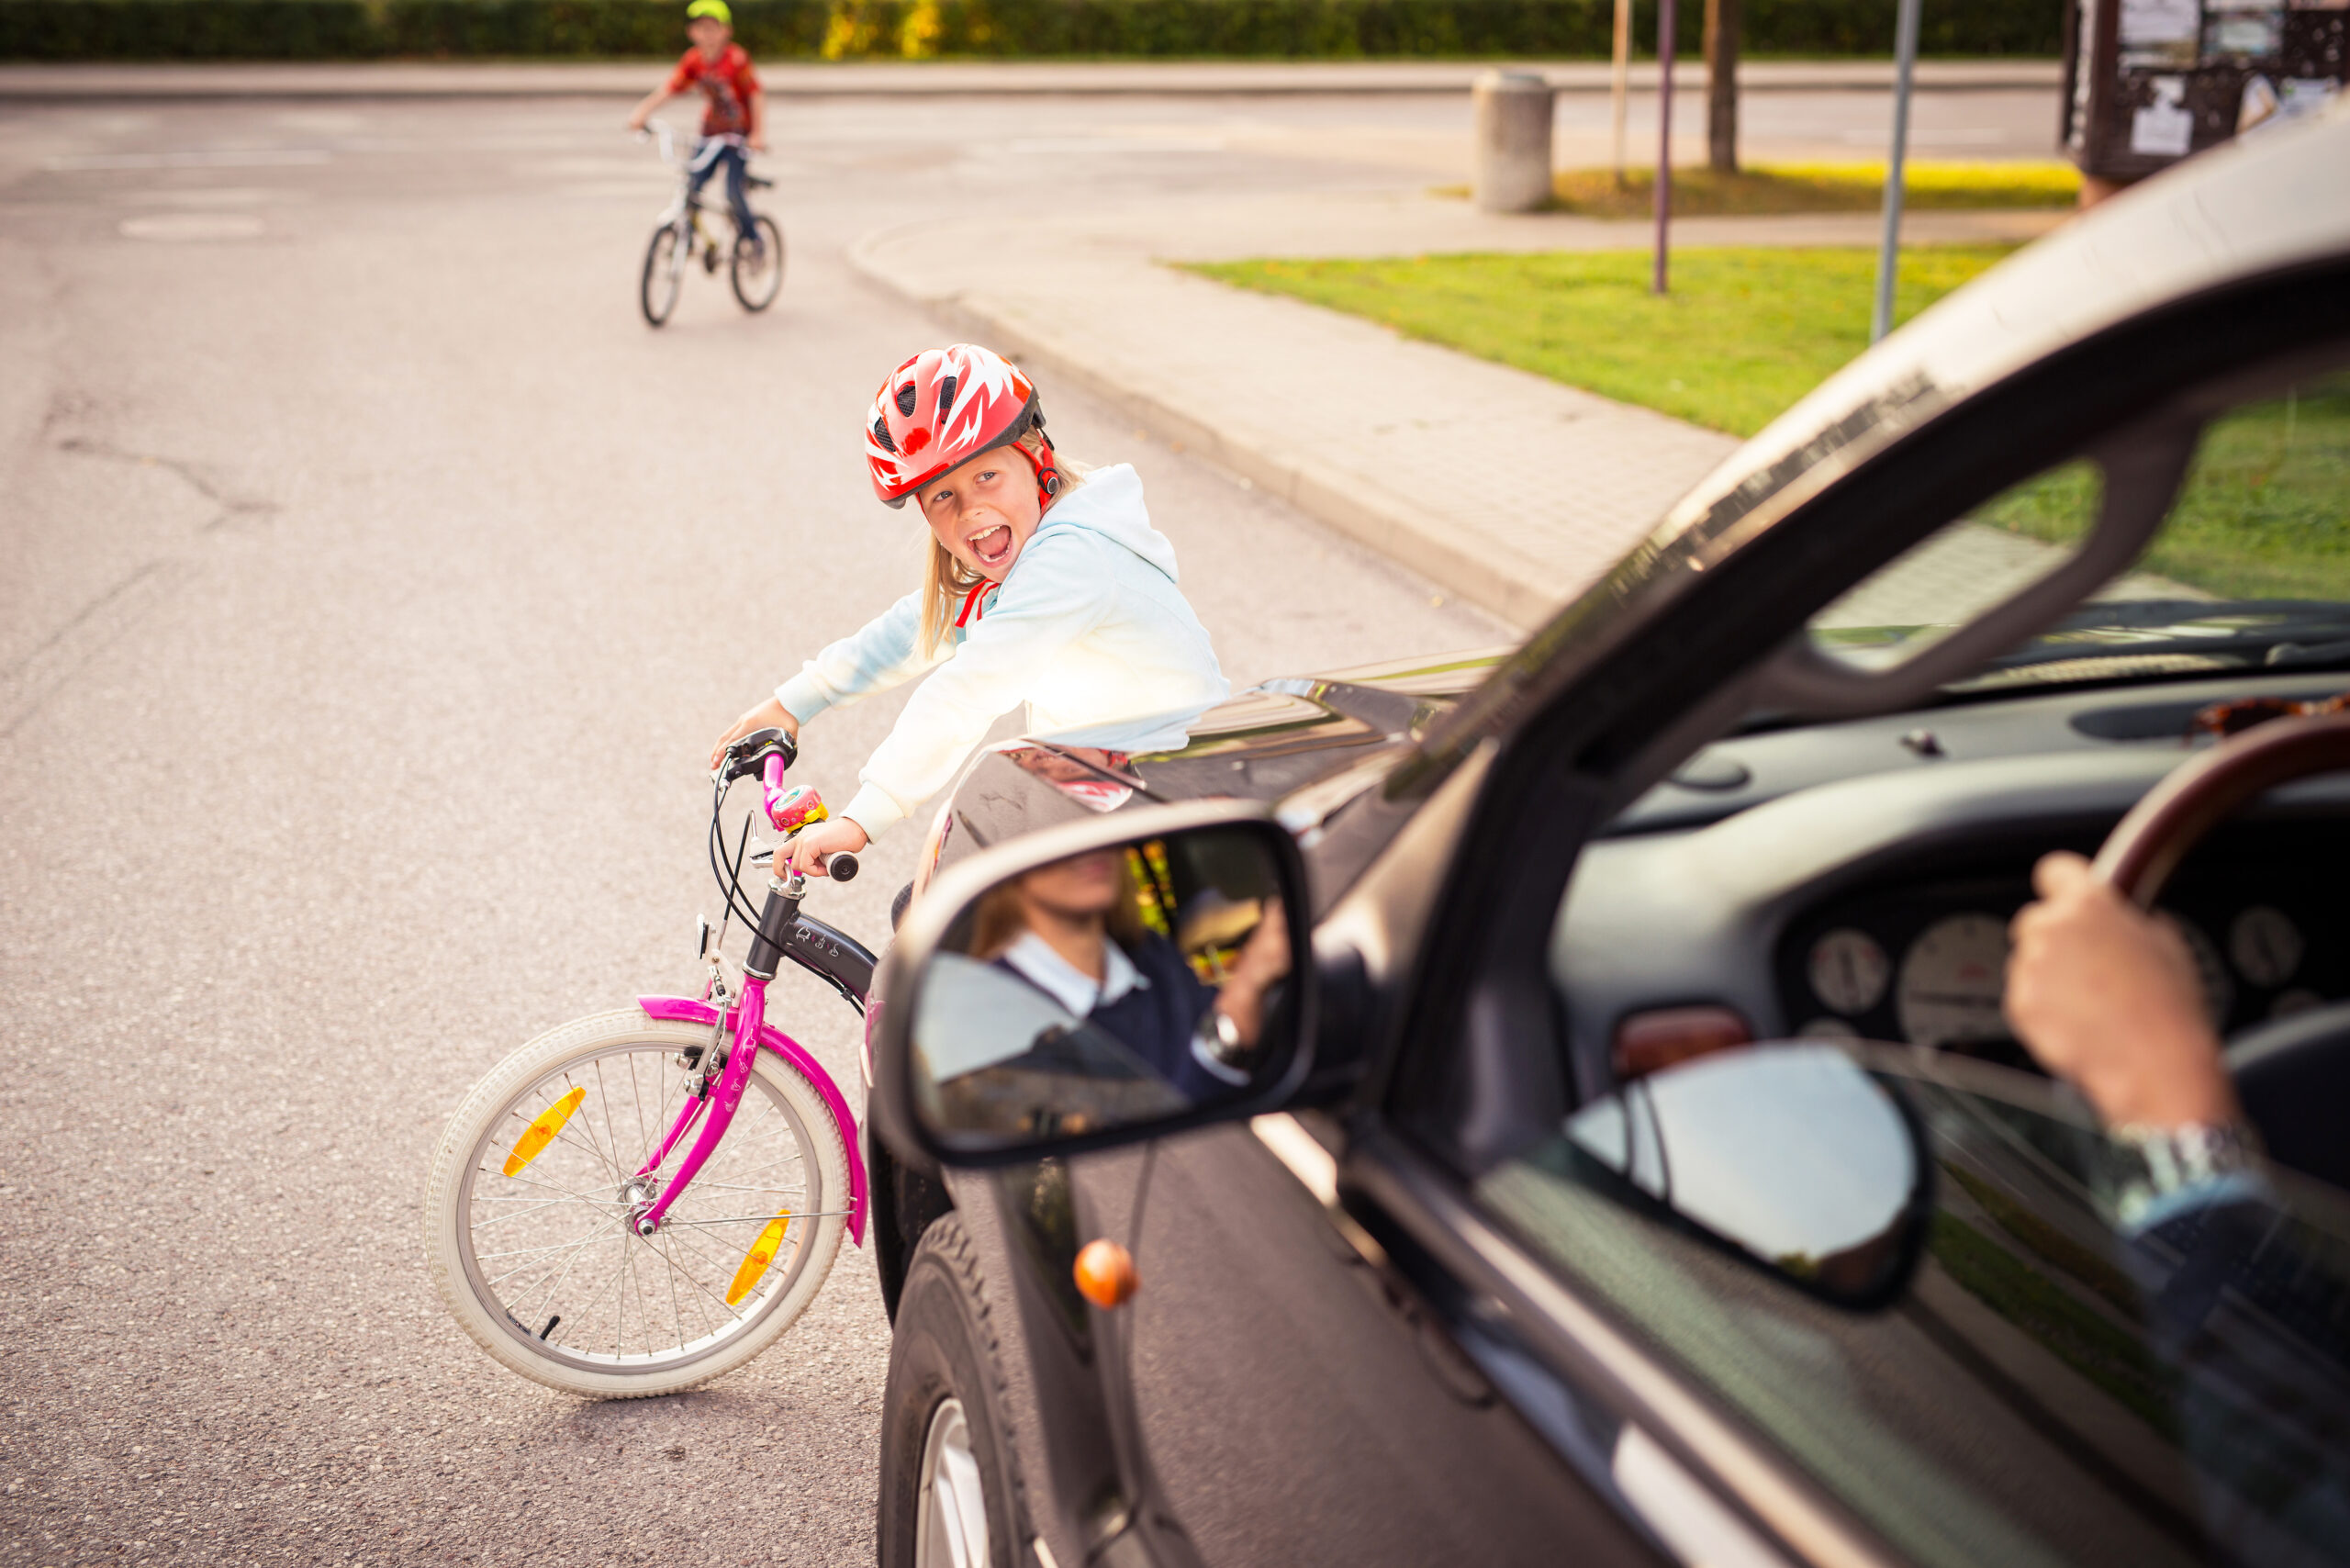 The dangers of distracted driving for cyclists in Florida